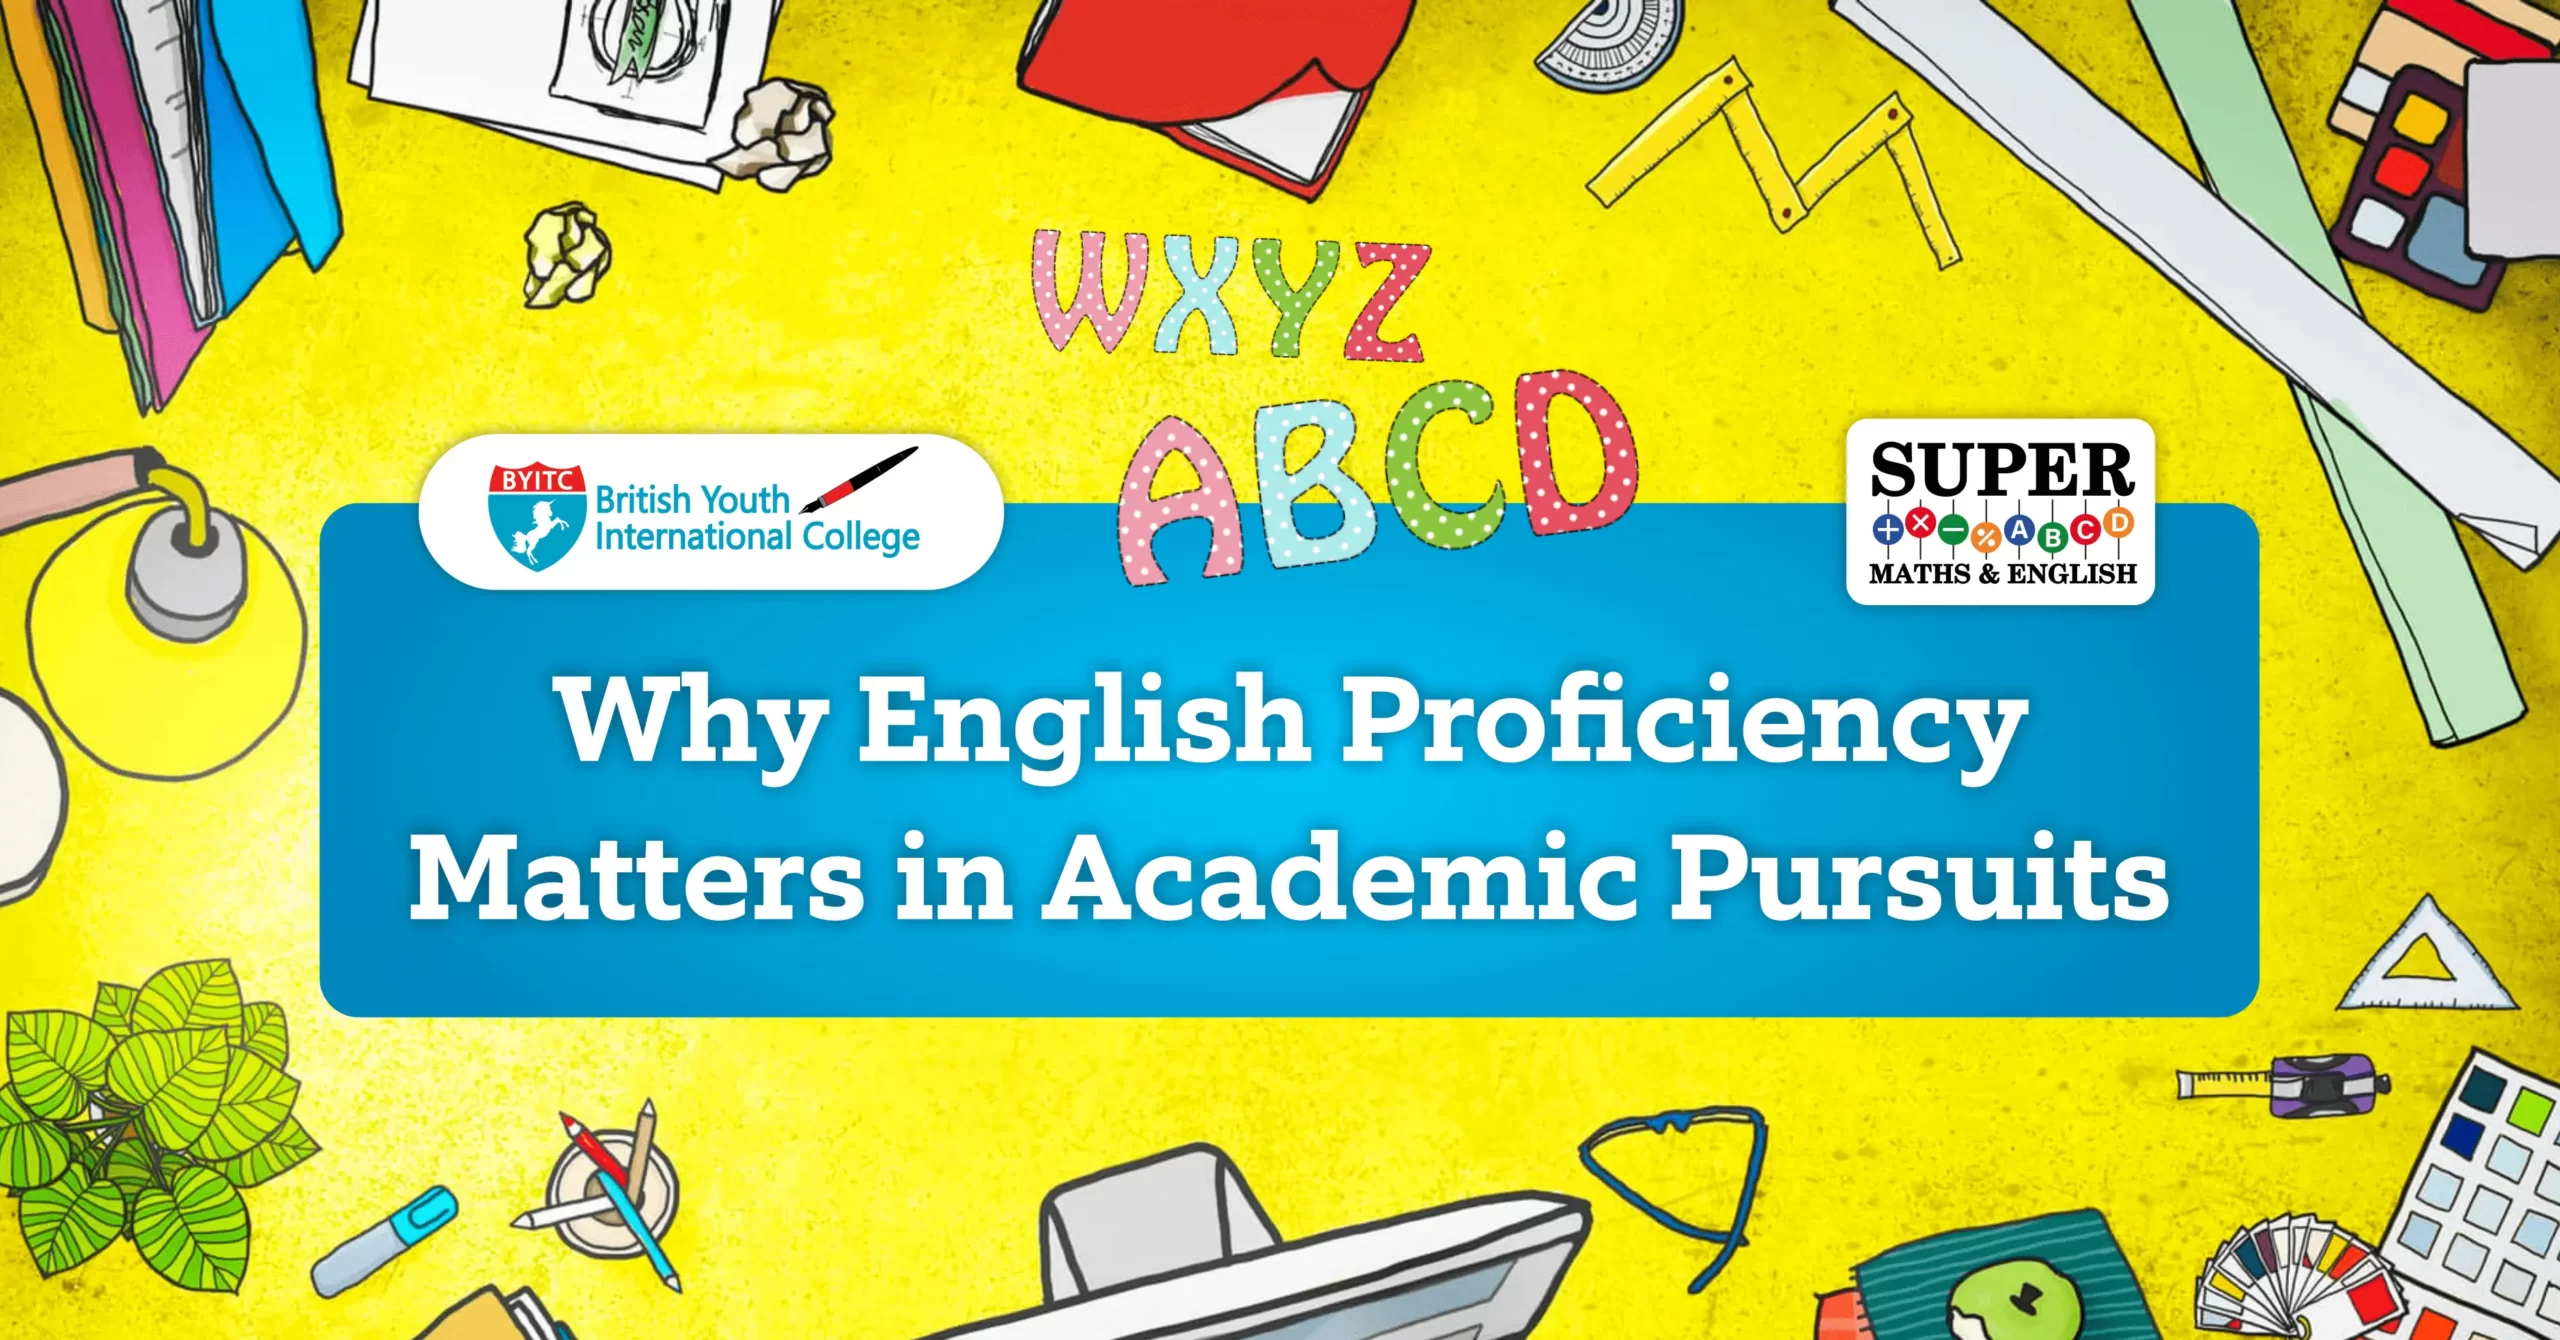 Why English Proficiency Matters in Academic Pursuits?